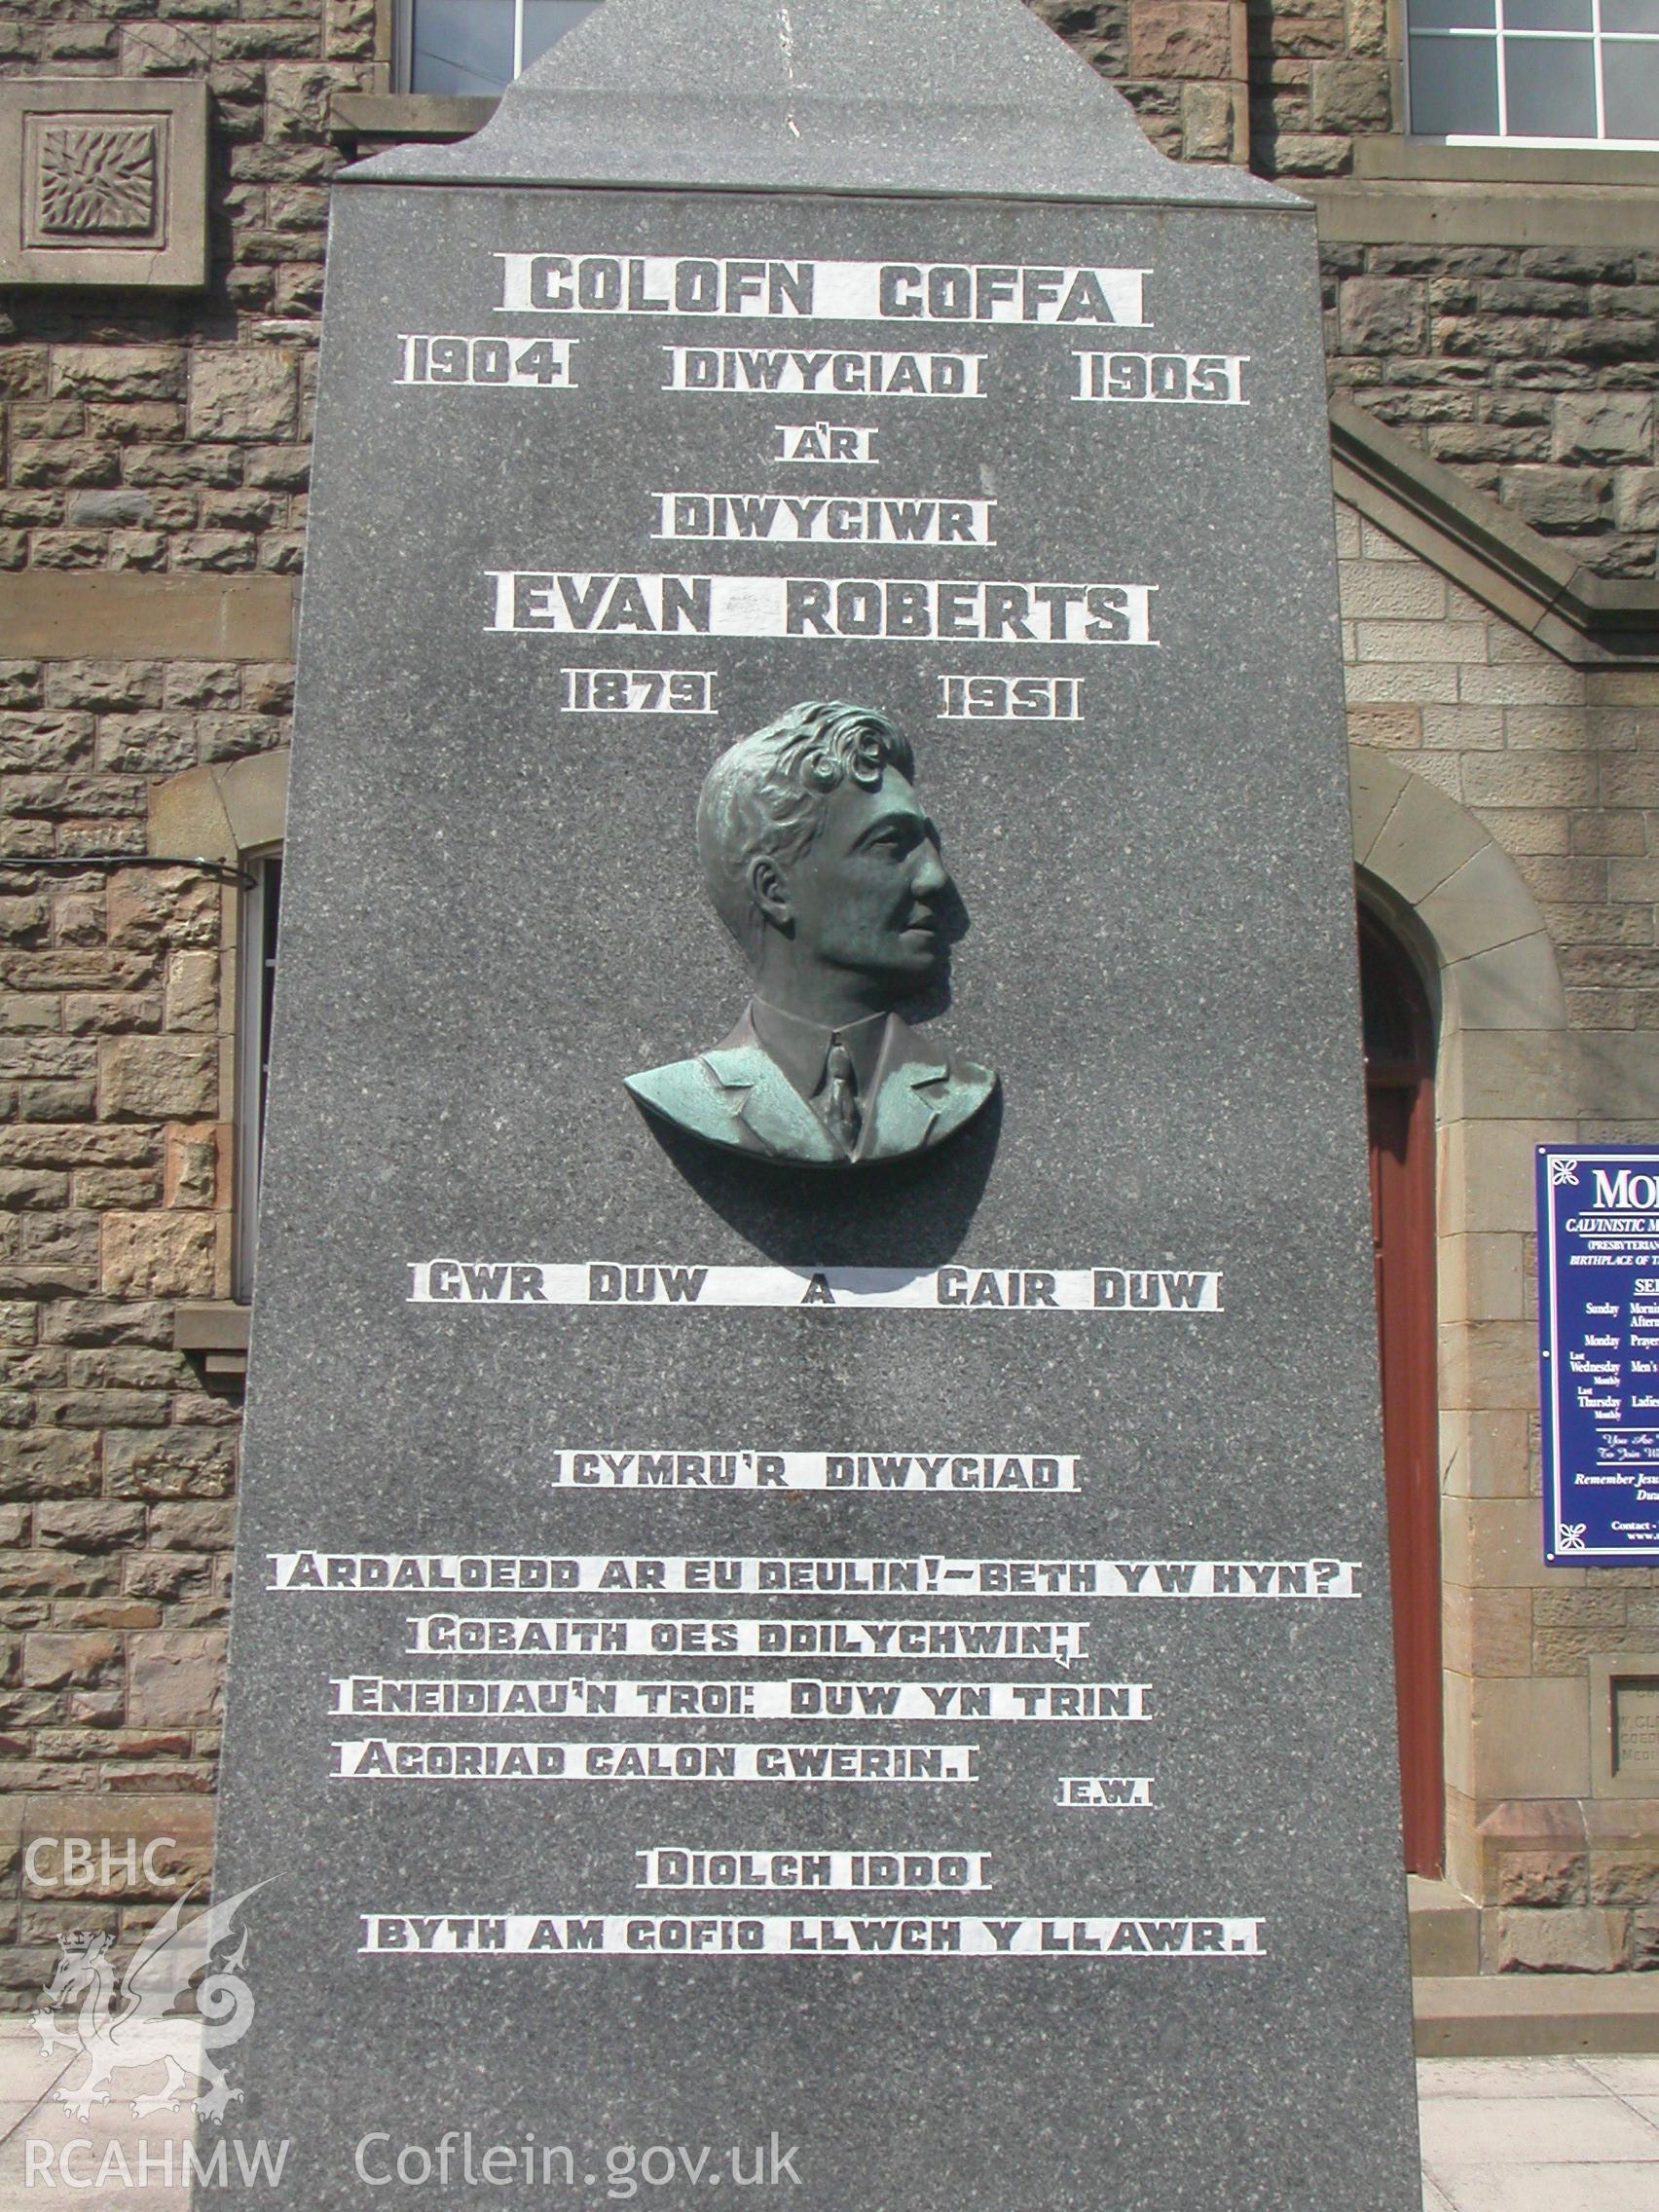 Profile bust of Evan Roberts on south-west front of monument.